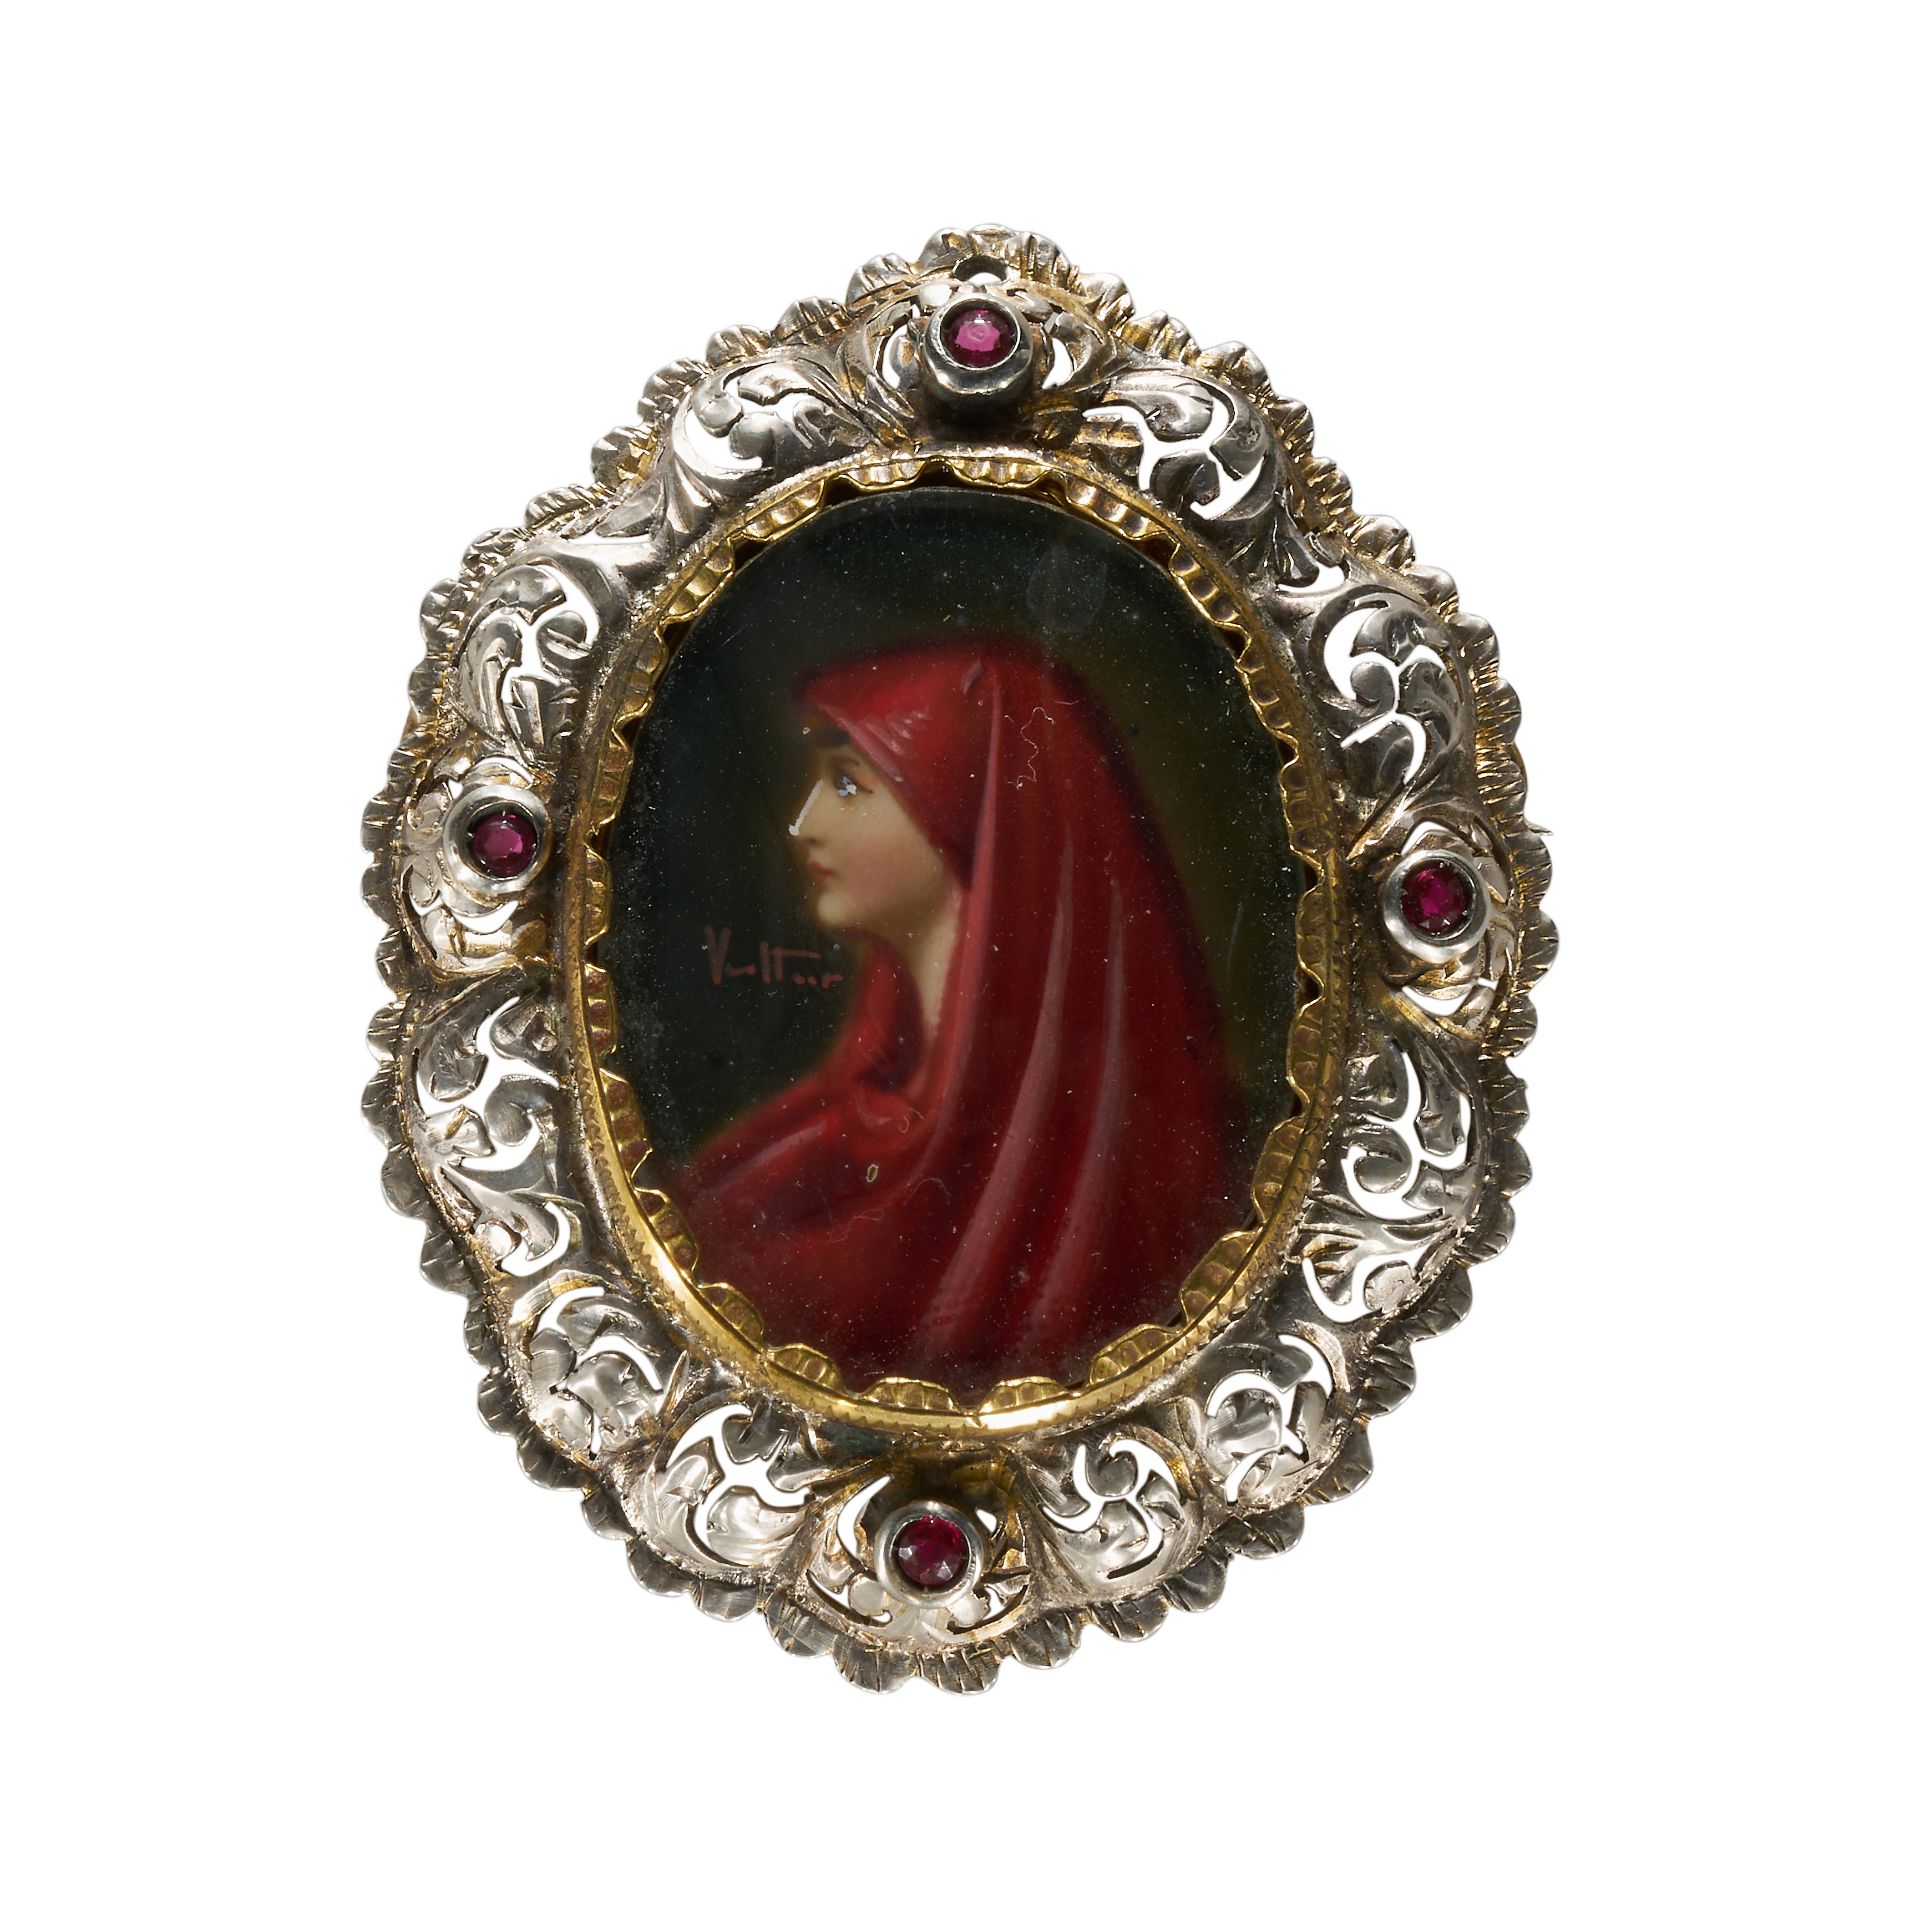 A YELLOW AND WHITE METAL PORTRAIT BROOCH.